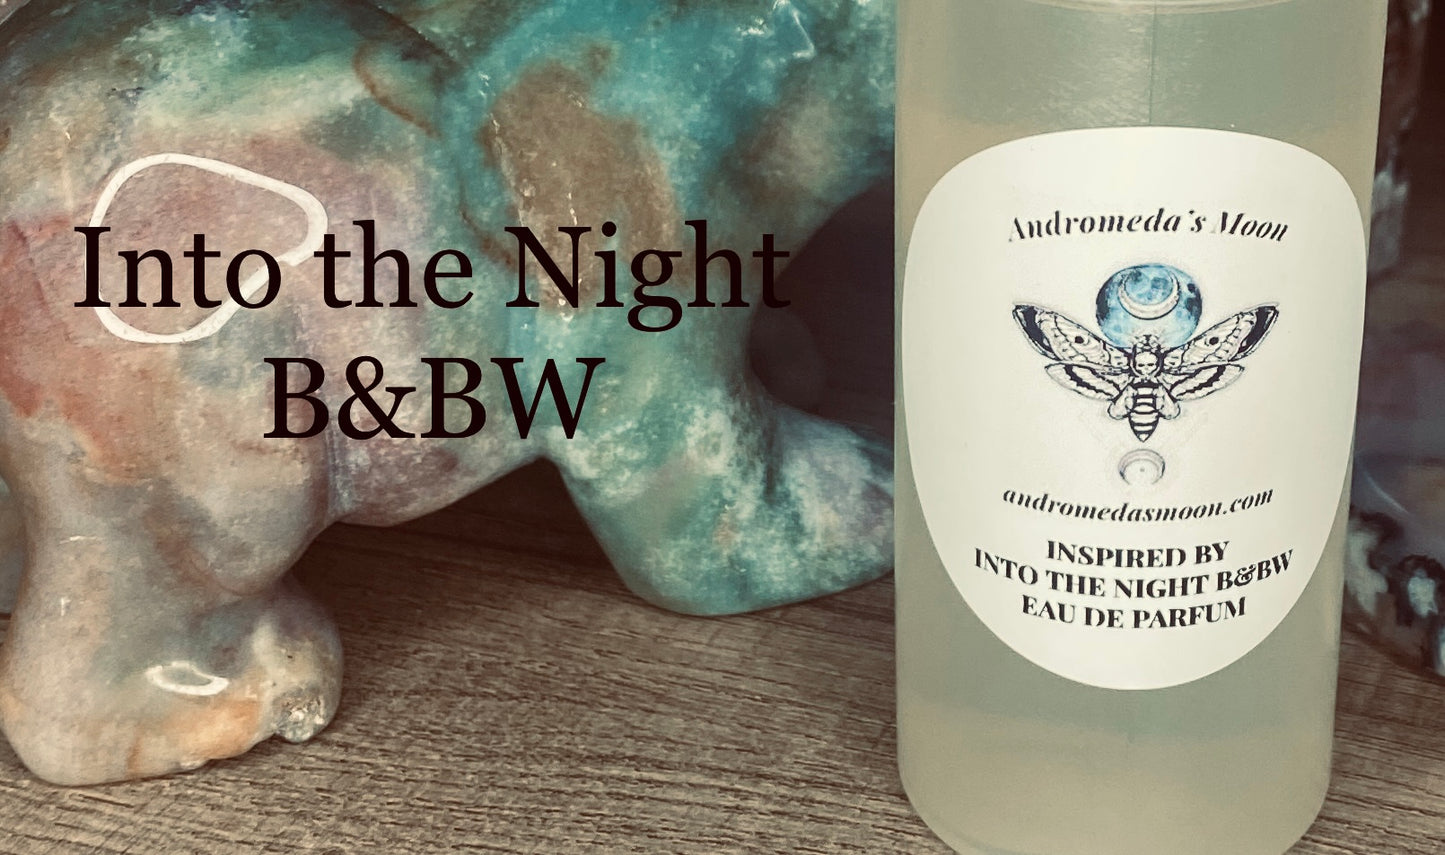 Inspired by Into The Night Eau De Parfum from Bath and Body Works